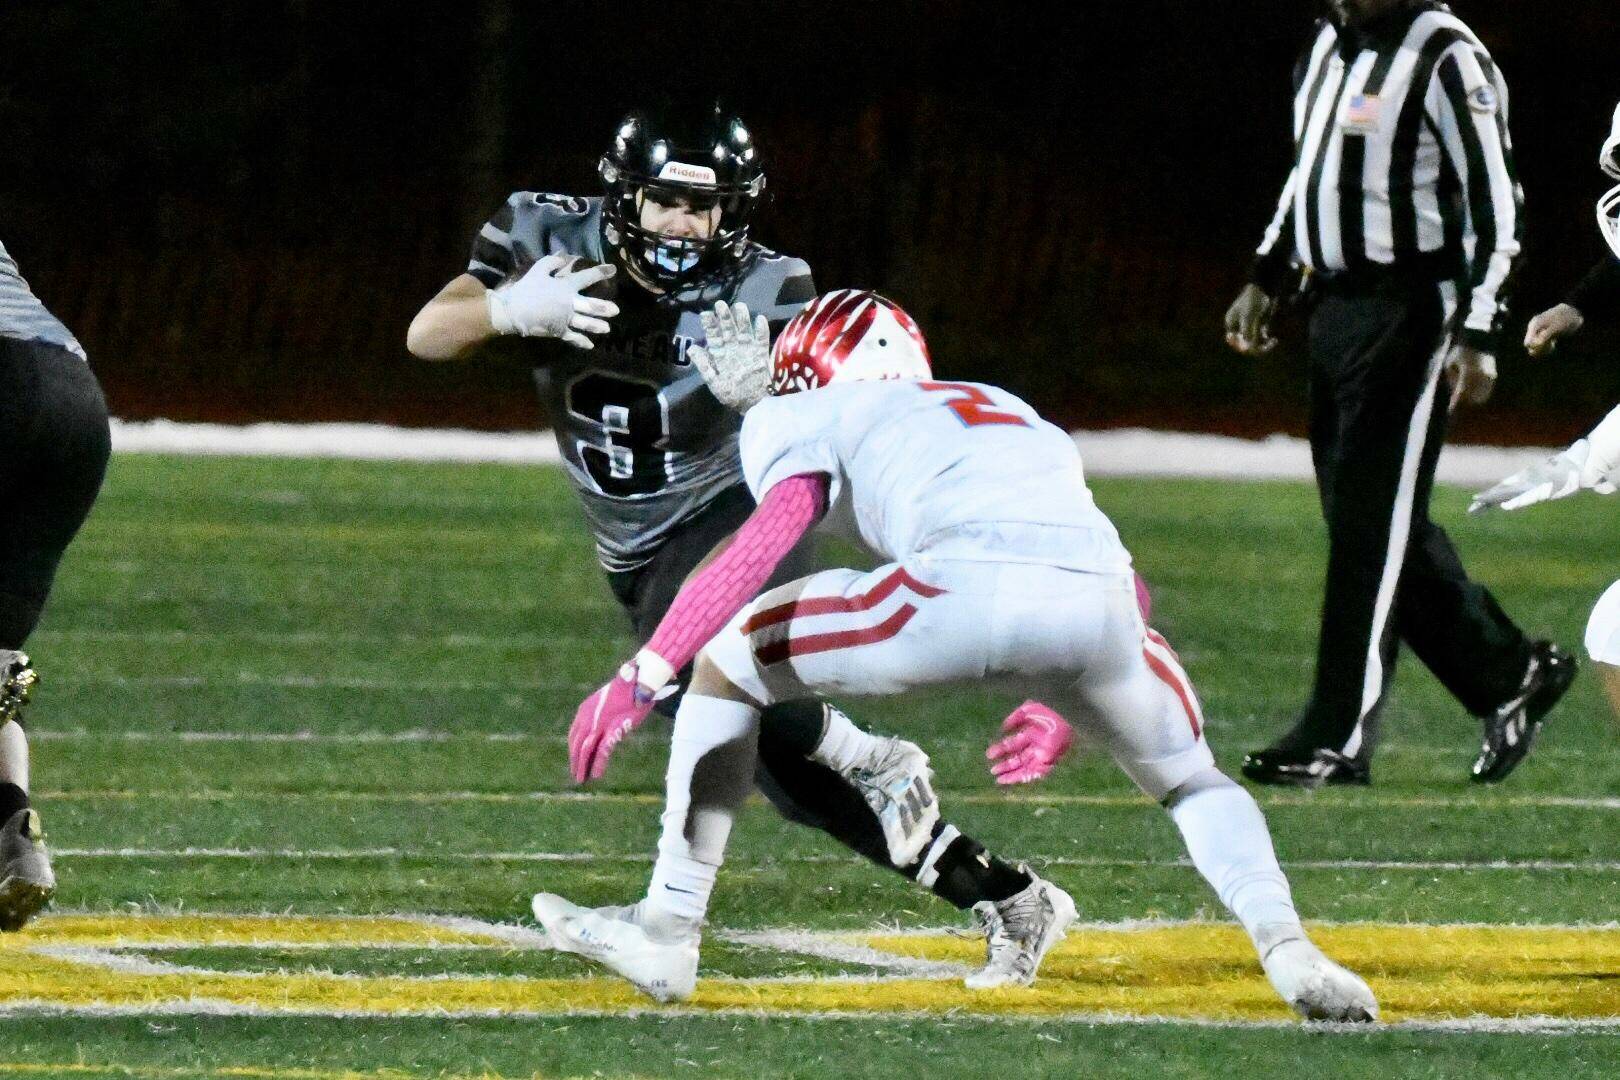 Gaby Soto makes a move against an East Anchorage defender during the Division I football state championship game played Friday night at Service High School in Anchorage. (Courtesy Photo / Larry Schrader)